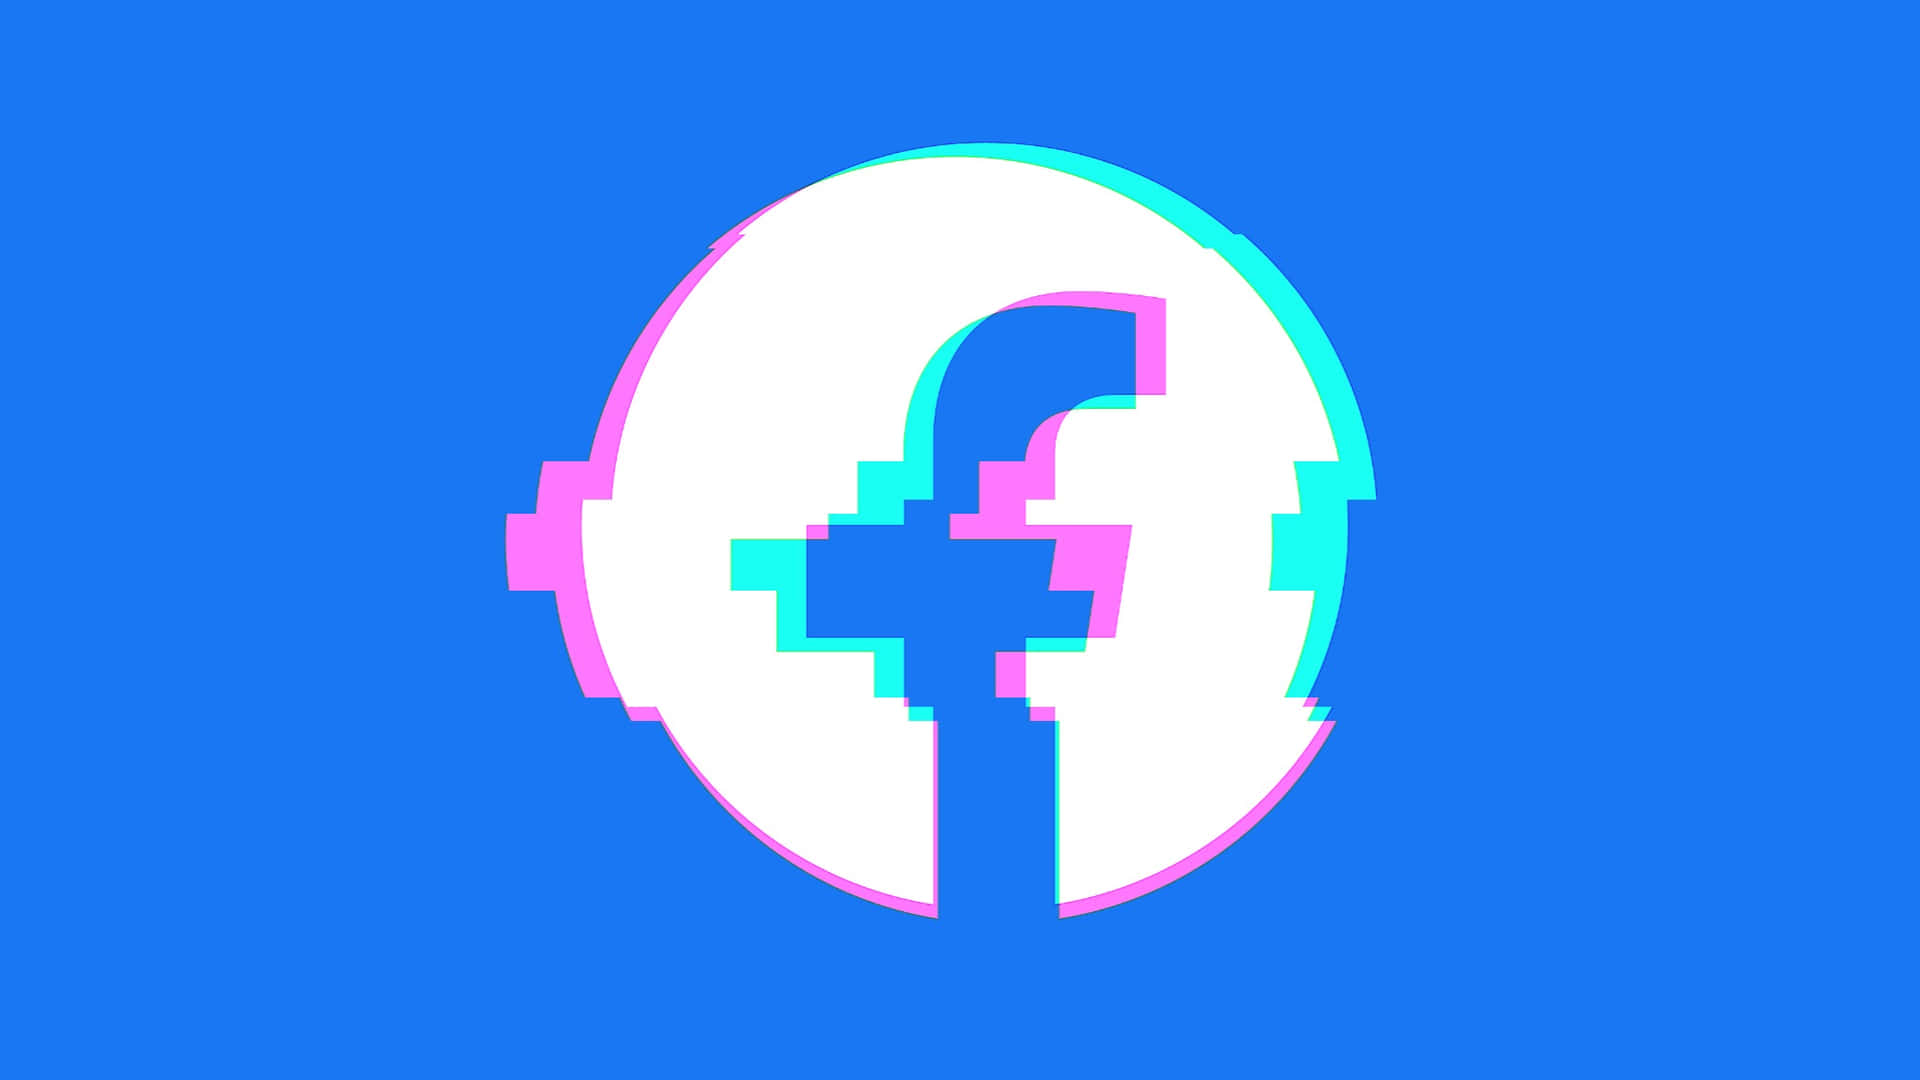 Facebook Logo In Pixelated Style